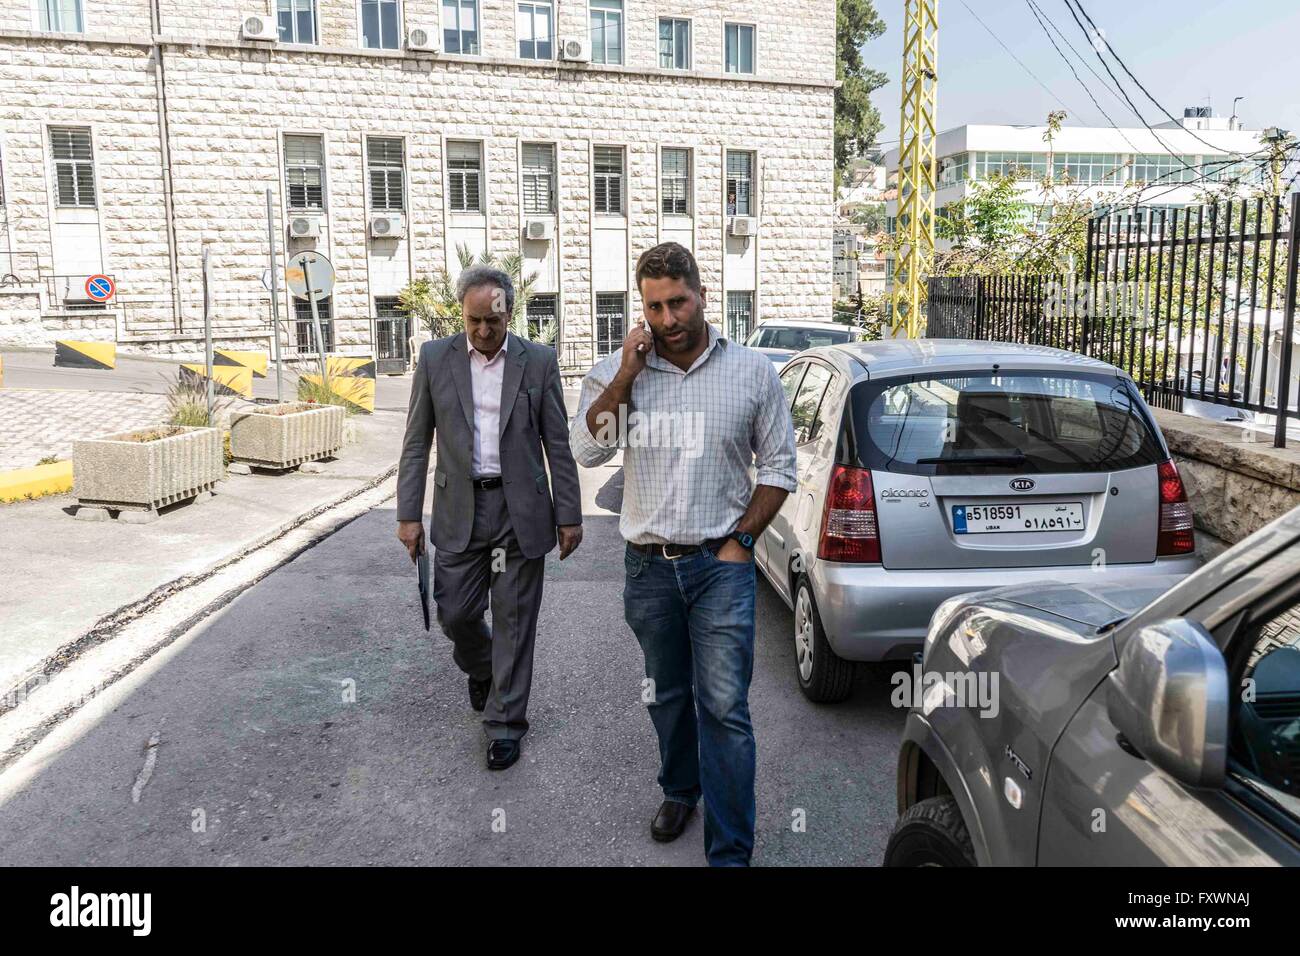 Beirut, Lebanon. 18th Apr, 2016. Father of abducted children and husband of Sally Faulkner, Ali Zeid al-Amin with his lawyer outside Baabda Court House where Sally Faulkner of Brisbane, Australia, and members of the Australian TV show '60 Minutes', a Nine Network production, are being held. They are being held after the abduction of her two children from the custody of her estranged husband, Ali Zeid al-Amin, a surfing instructor who lives south of the Lebanese capital, Beirut. Tara Brown, the presenter famous from 60 Minutes, reporter Stephen Rice, cameraman Ben Williamson and sound recor Stock Photo